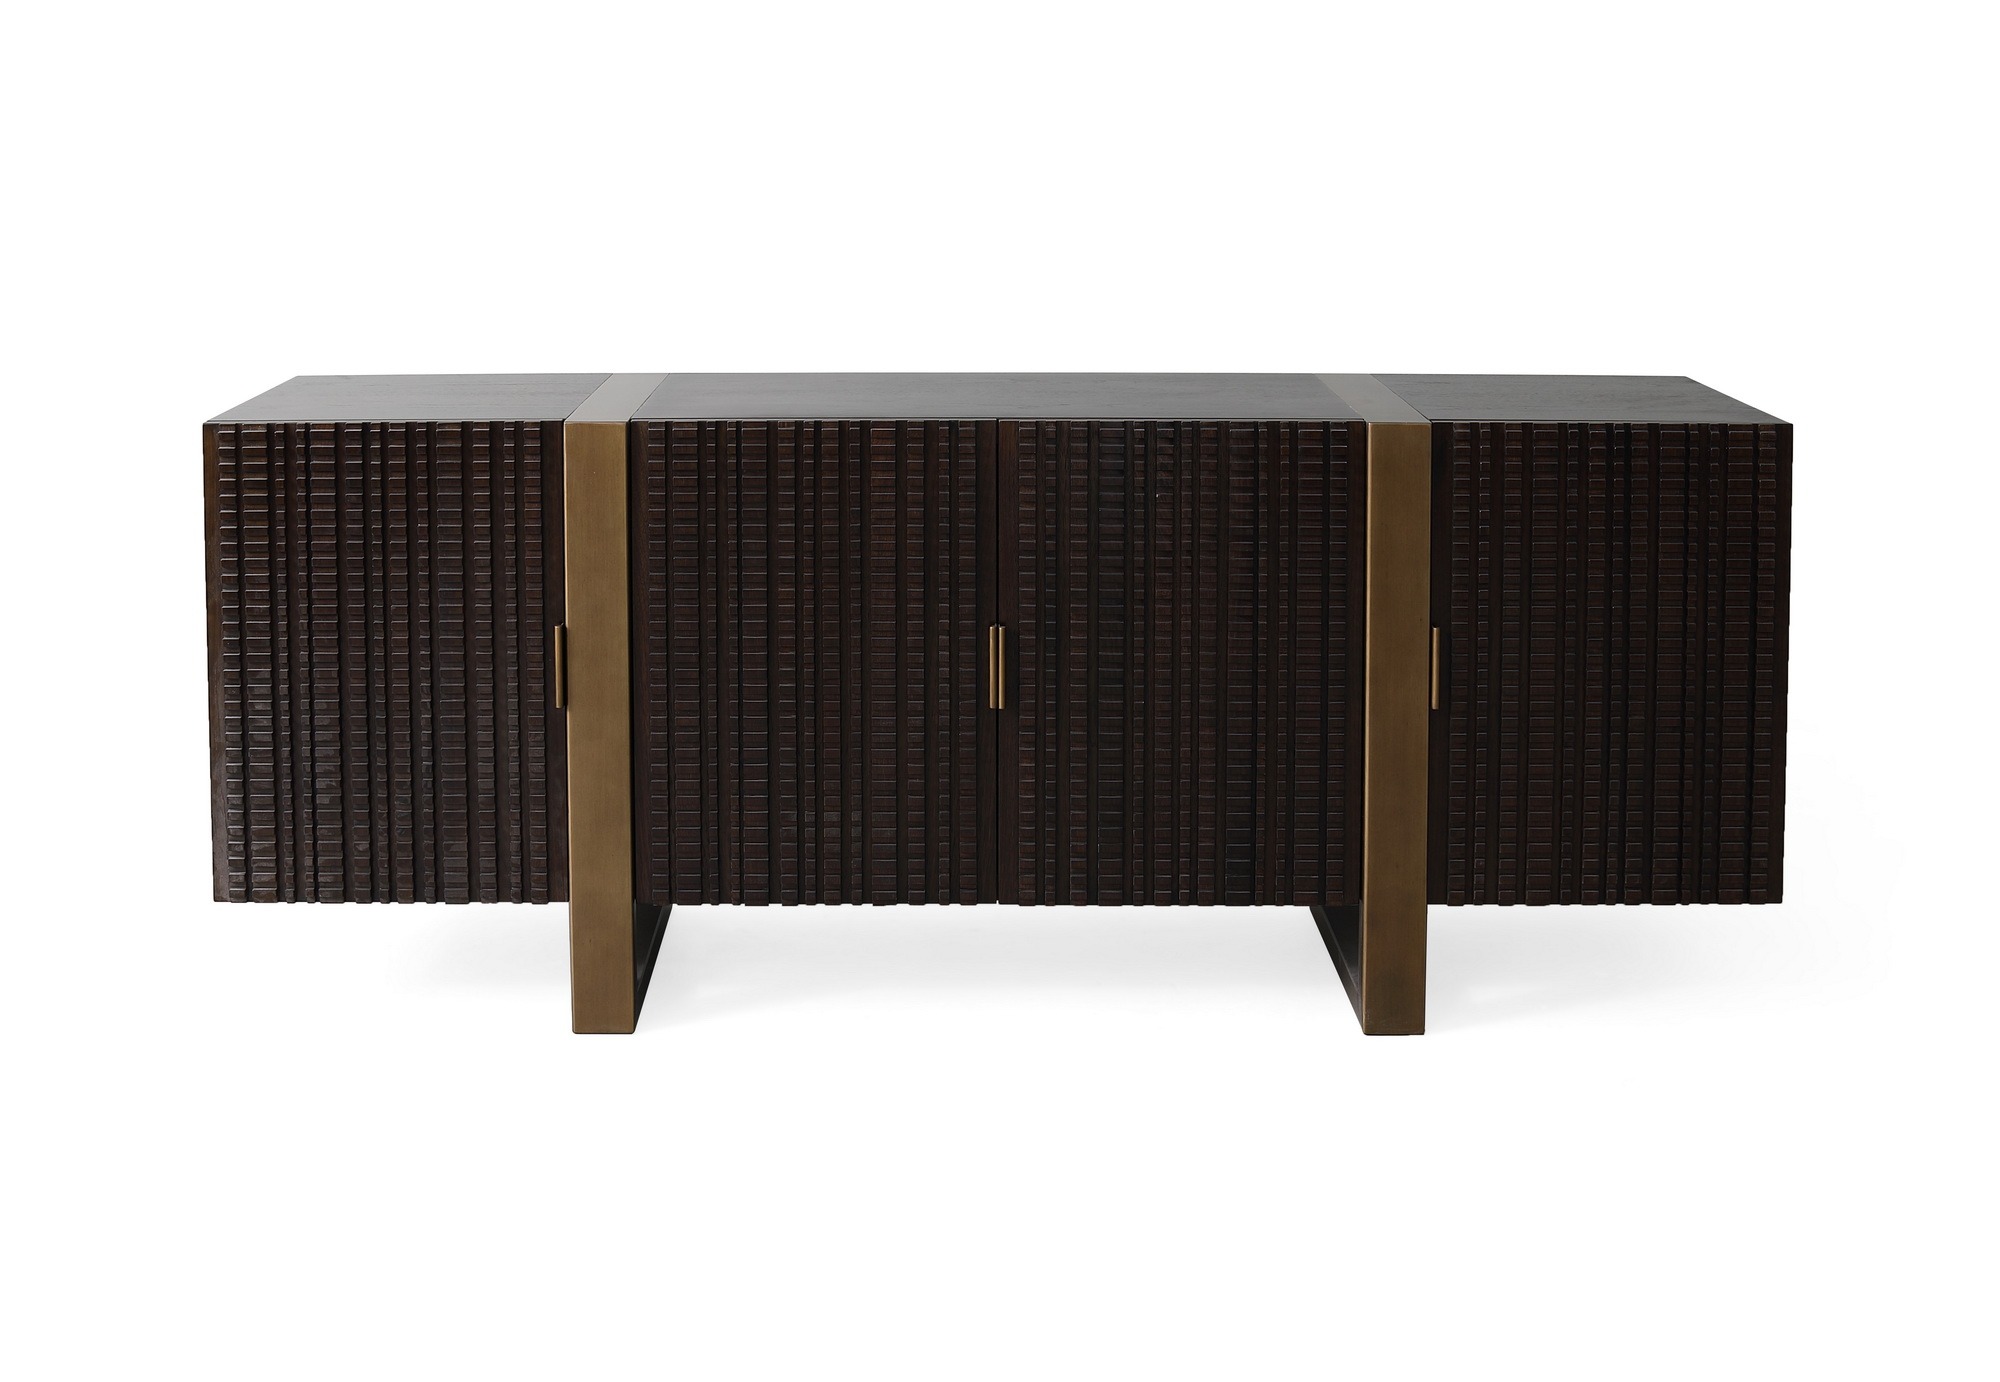 The Bandini Low Cabinet in Dark Walnut with Finished Aged Brass sits in a studio.